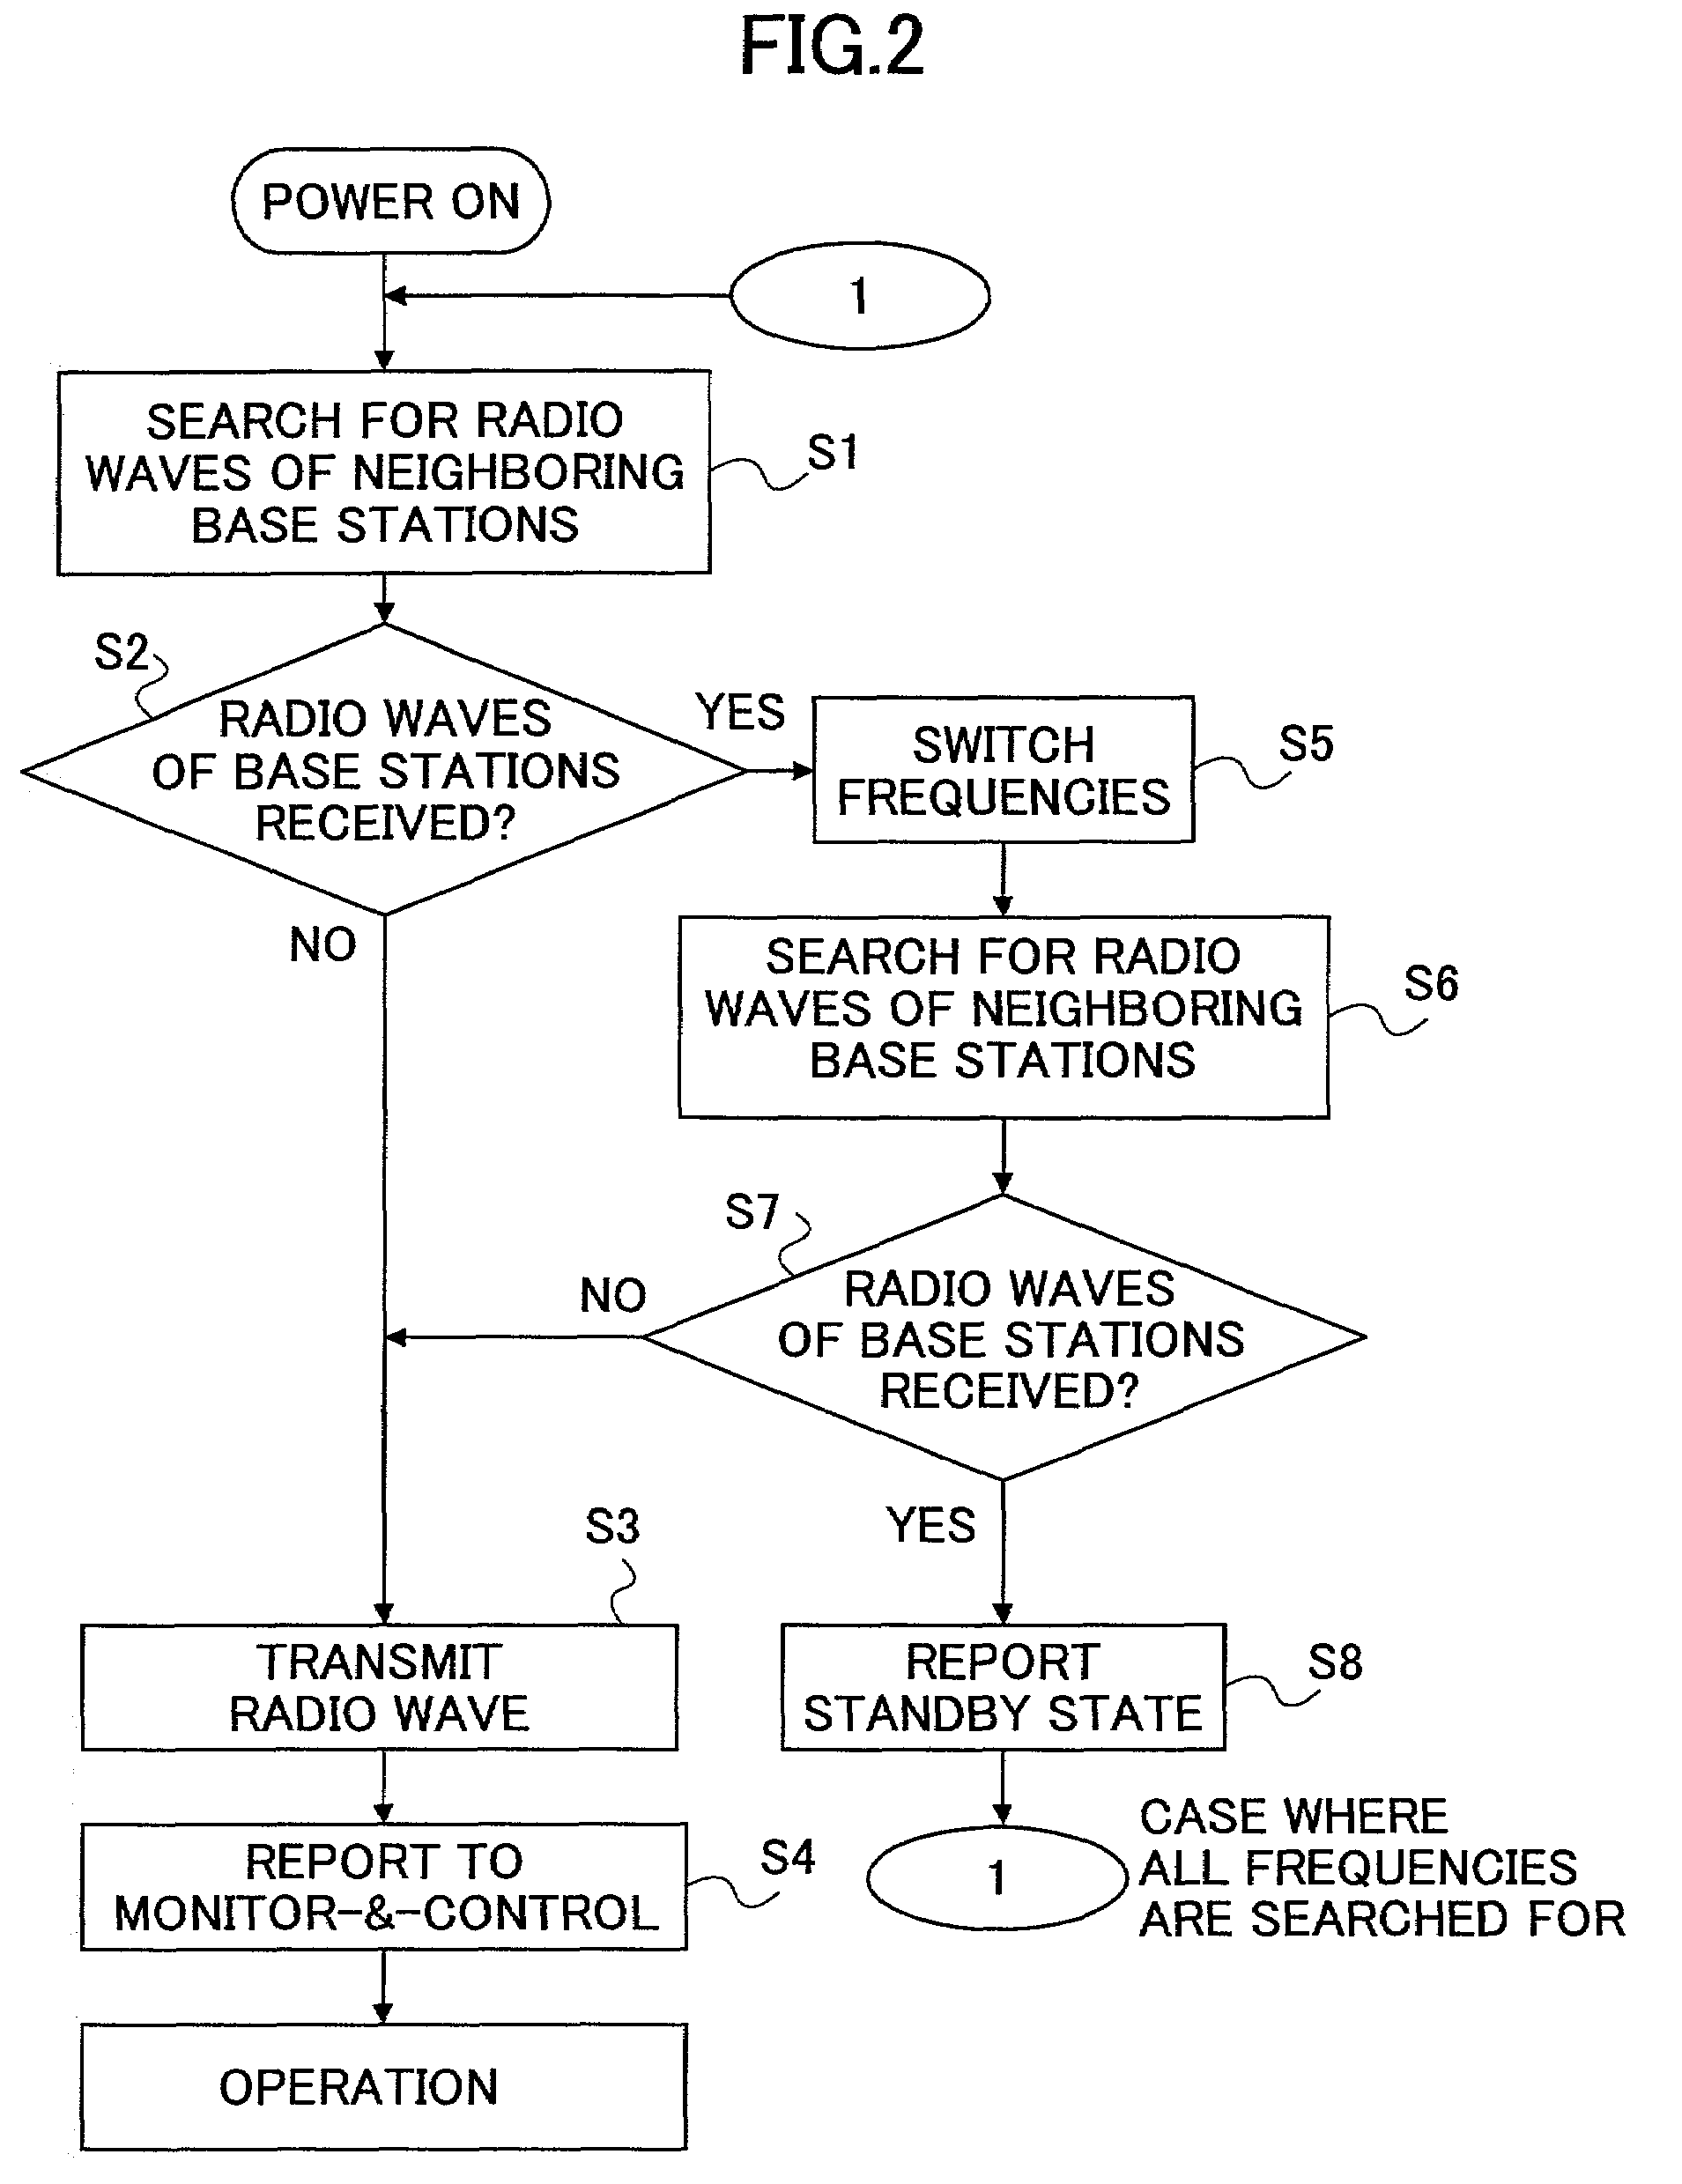 Controlling operation of mobile base station so as to avoid radio interference